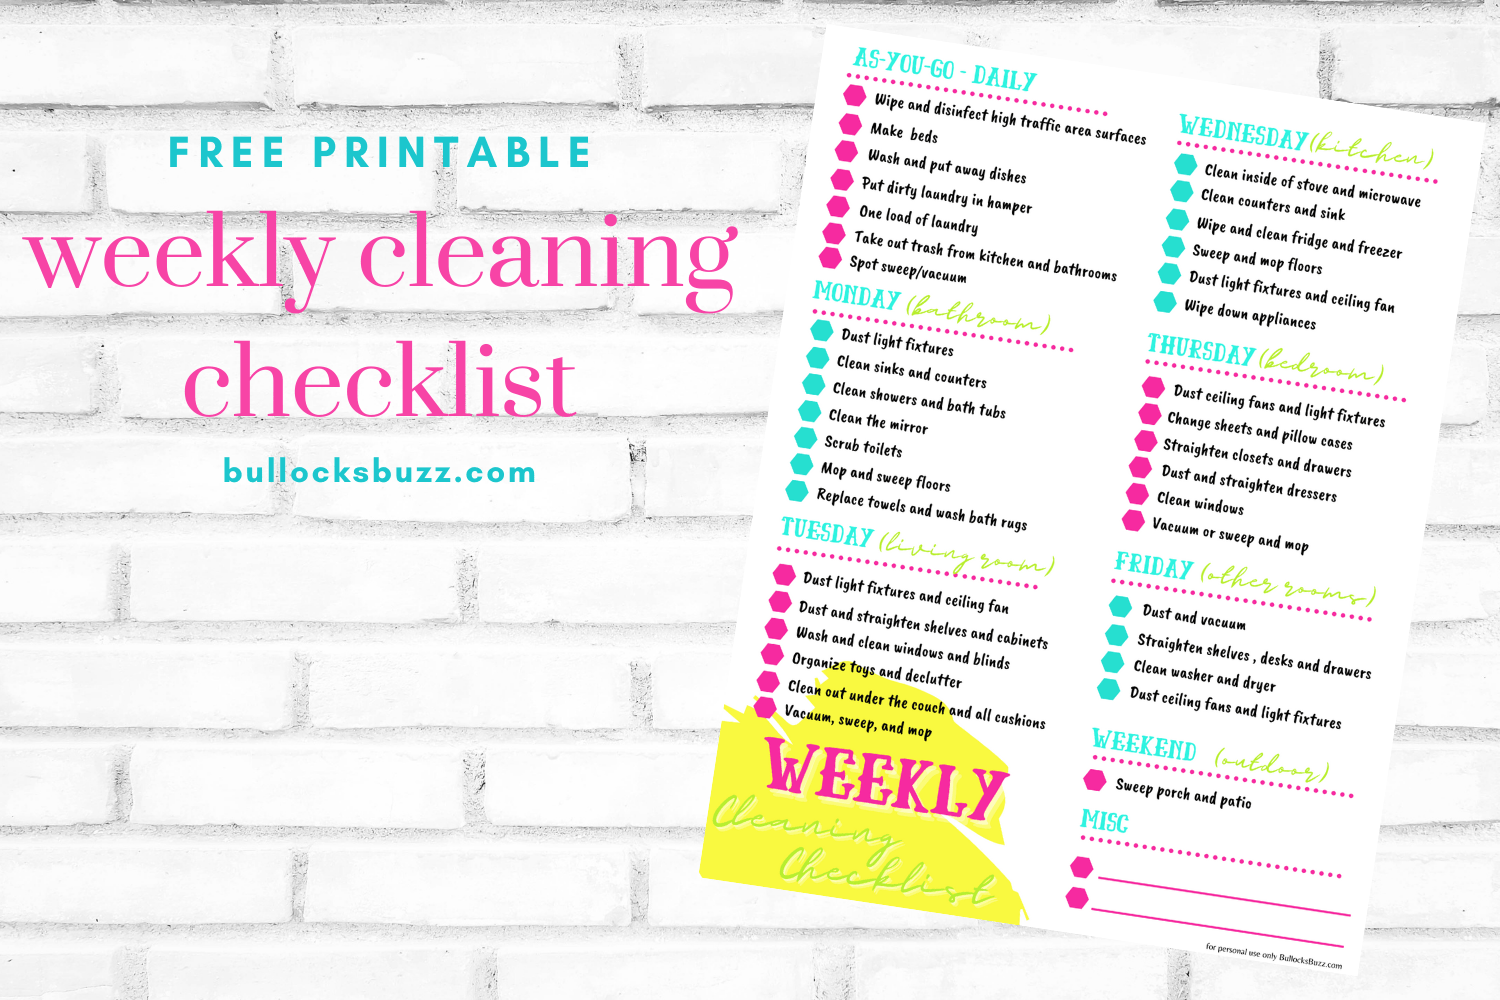 weekly cleaning checklist image